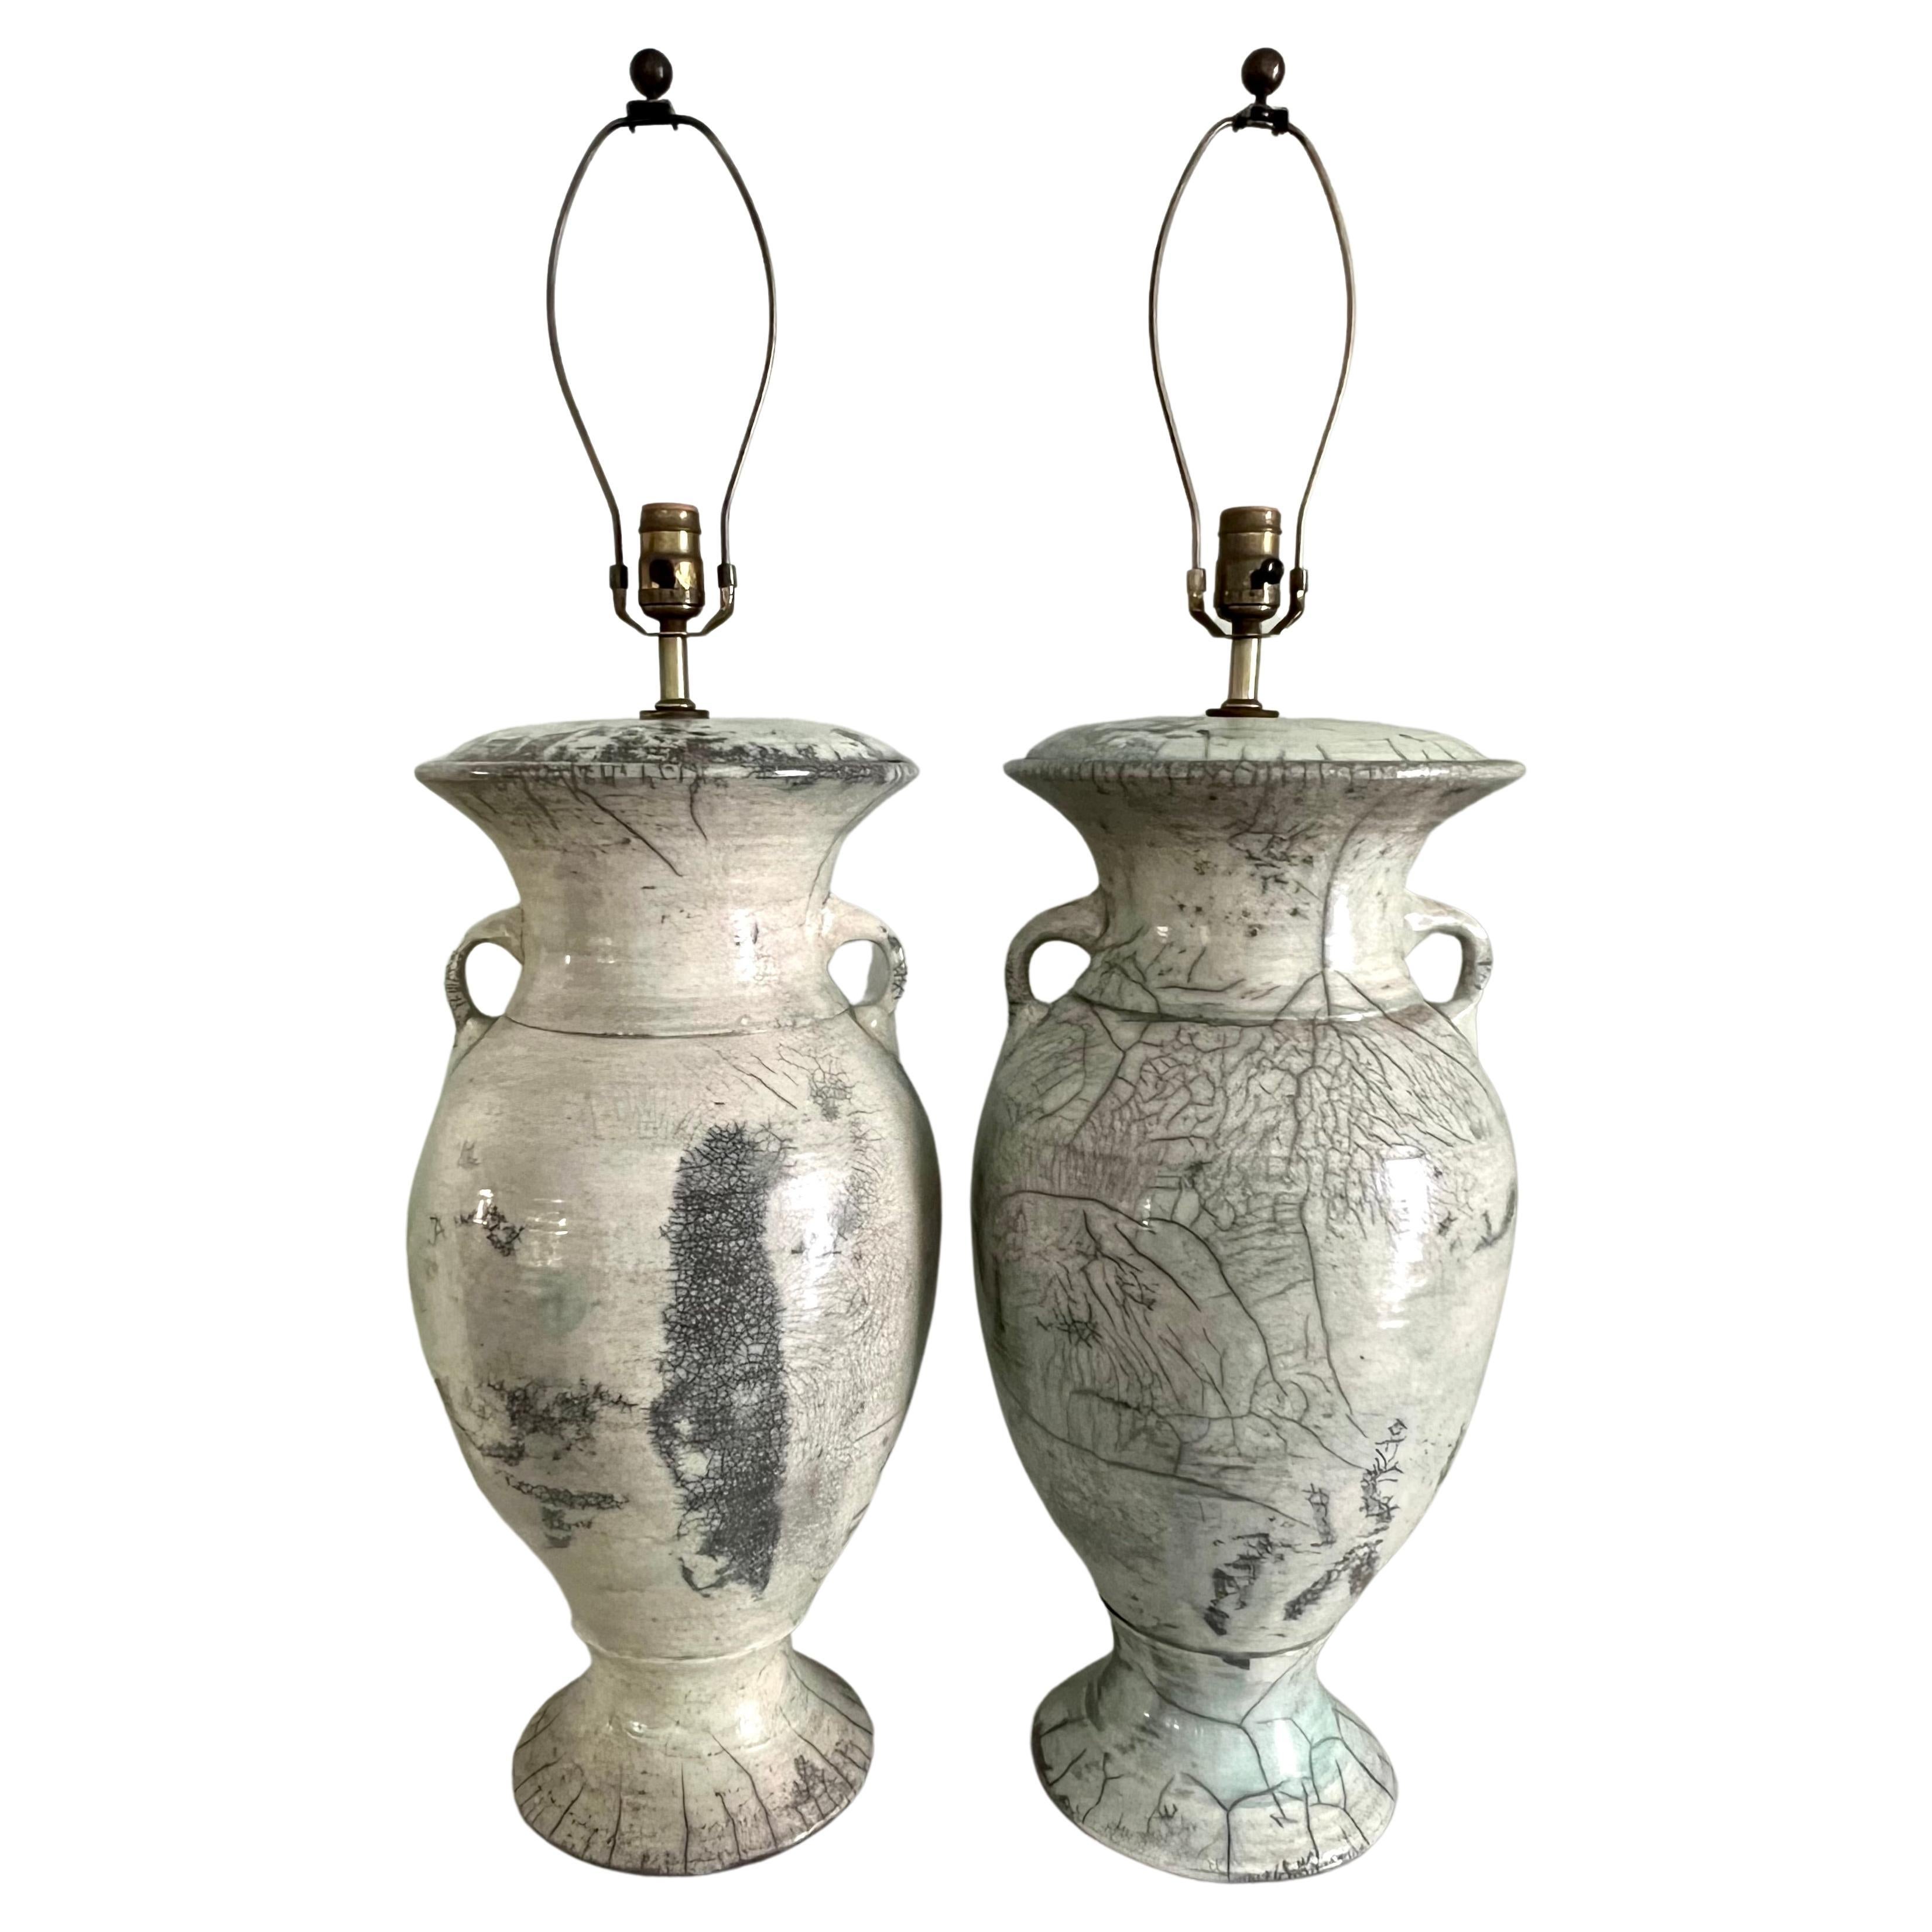 Pair of Japanese Fired Raku Pottery Glazed Urn Table Lamps